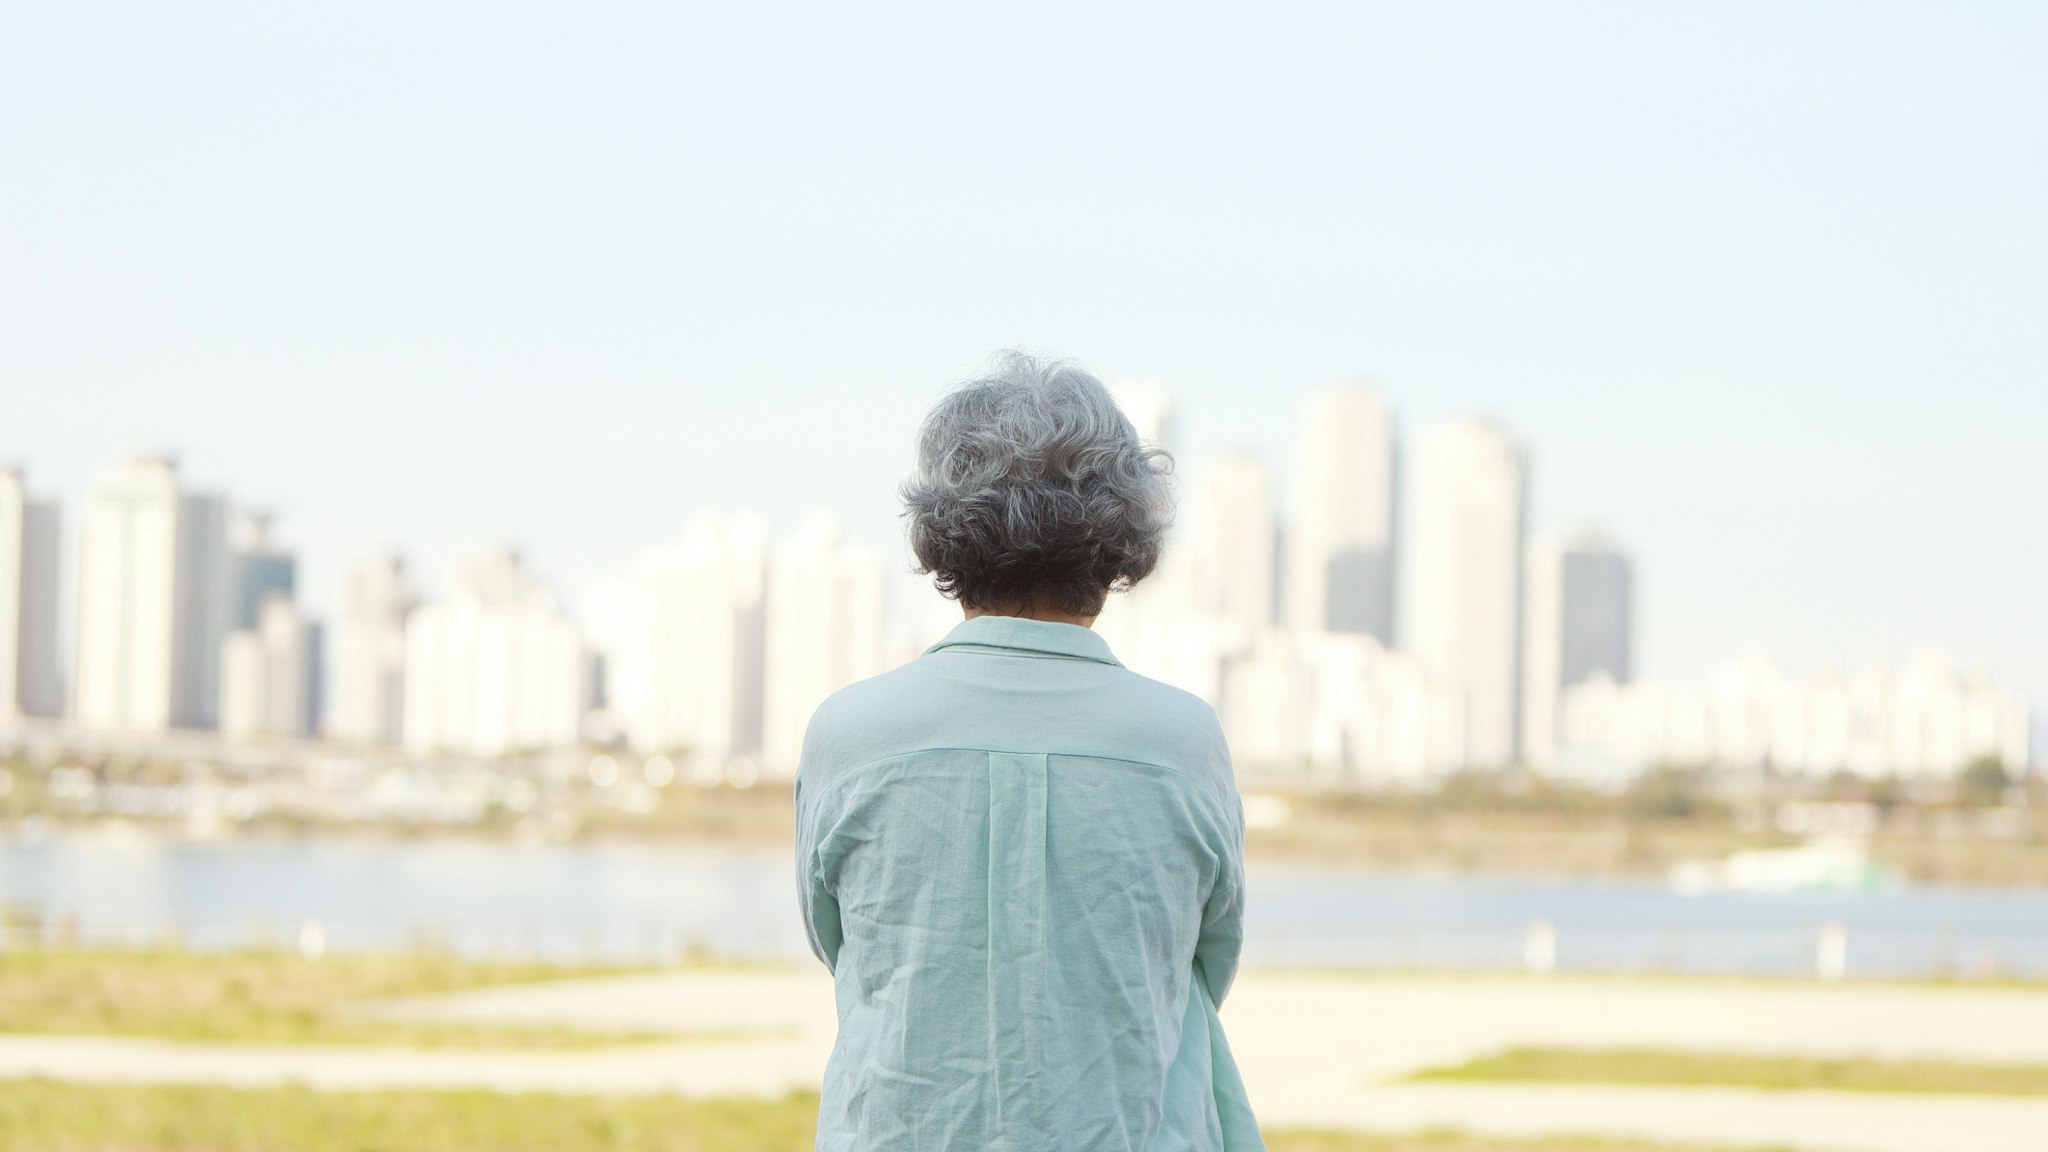 Rear view of senior woman standing by river bank - stock photo